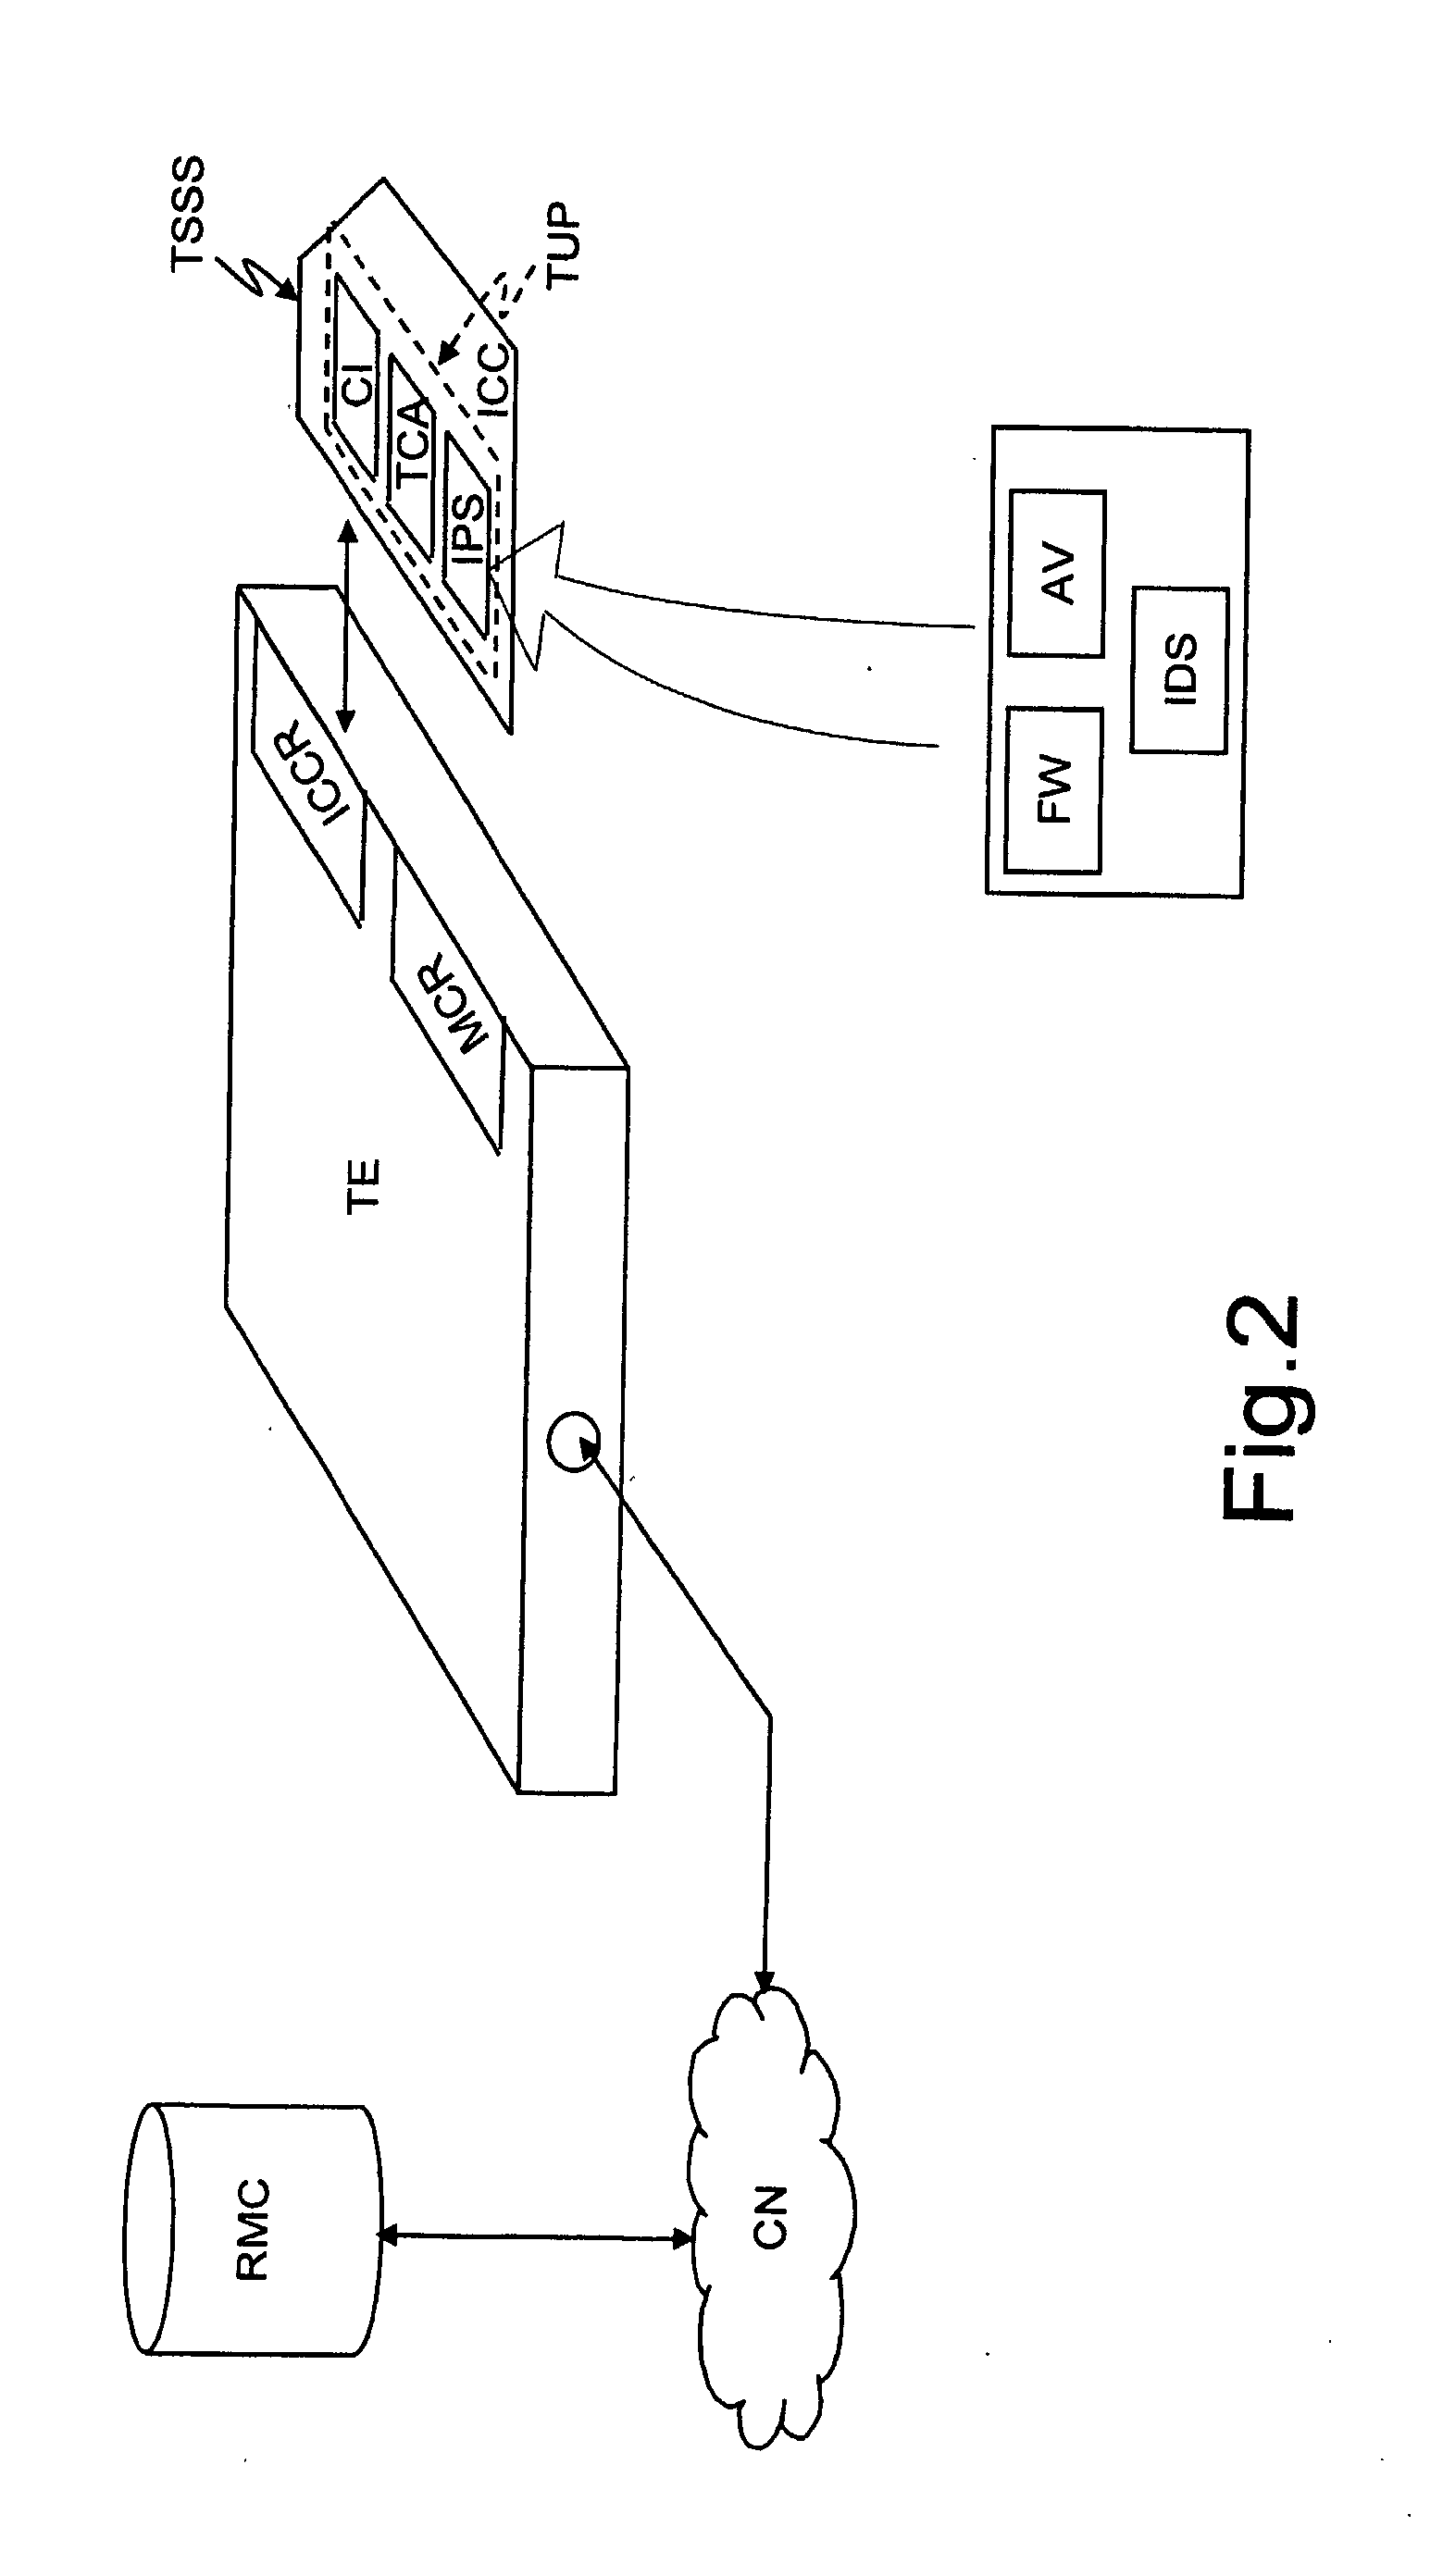 System and Method for Remote Security Management of a User Terminal Via a Trusted User Platform